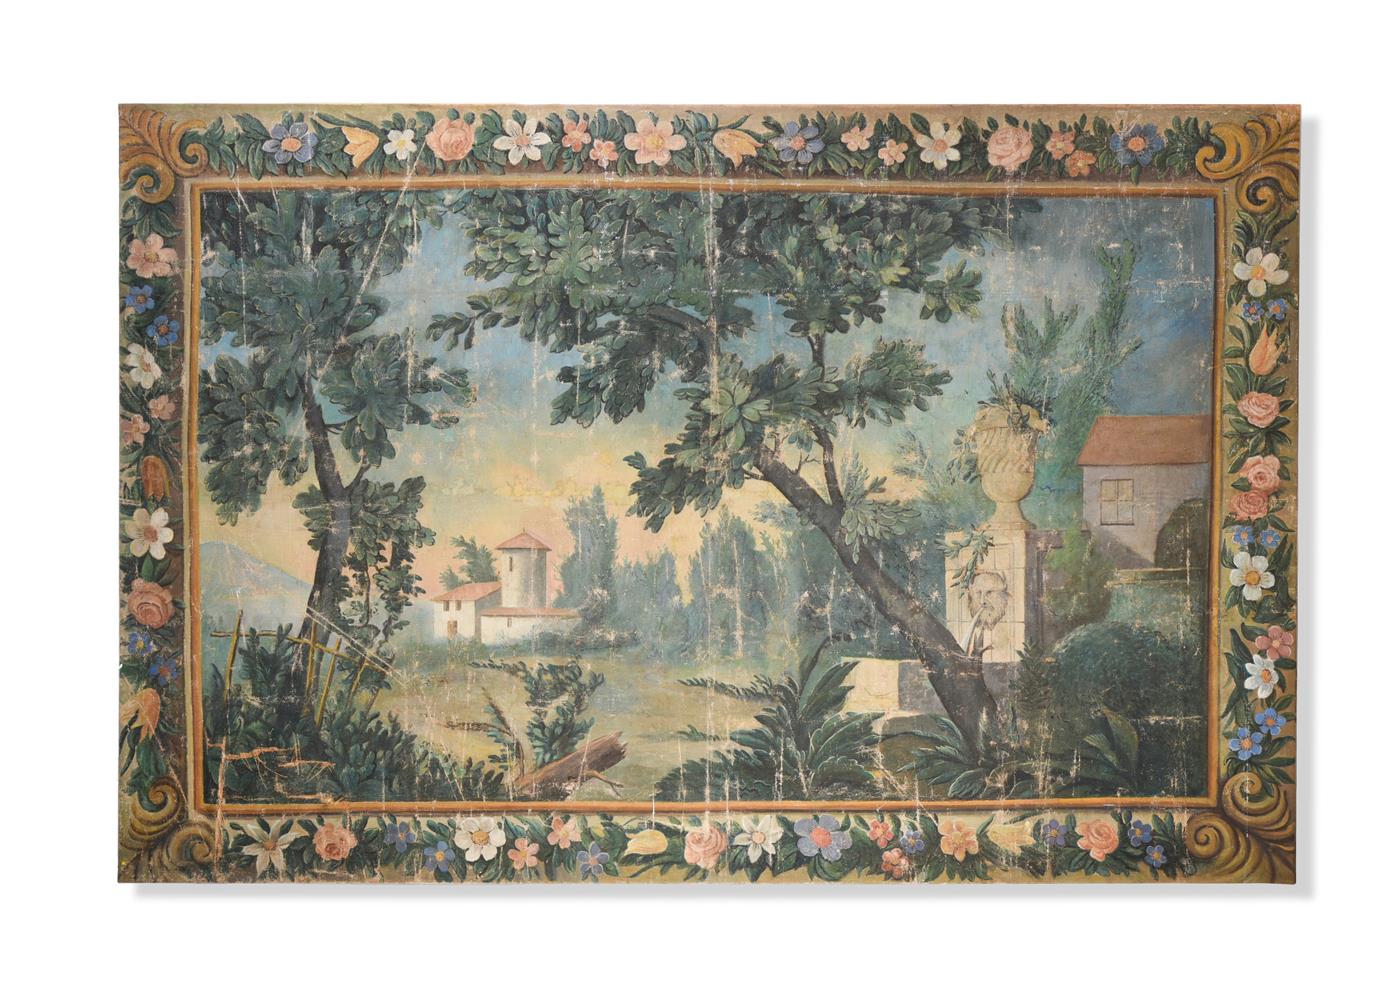 CONTINENTAL SCHOOL (LATE 19TH CENTURY) LANDSCAPE CARTOON WITH PAINTED FLORAL BORDER